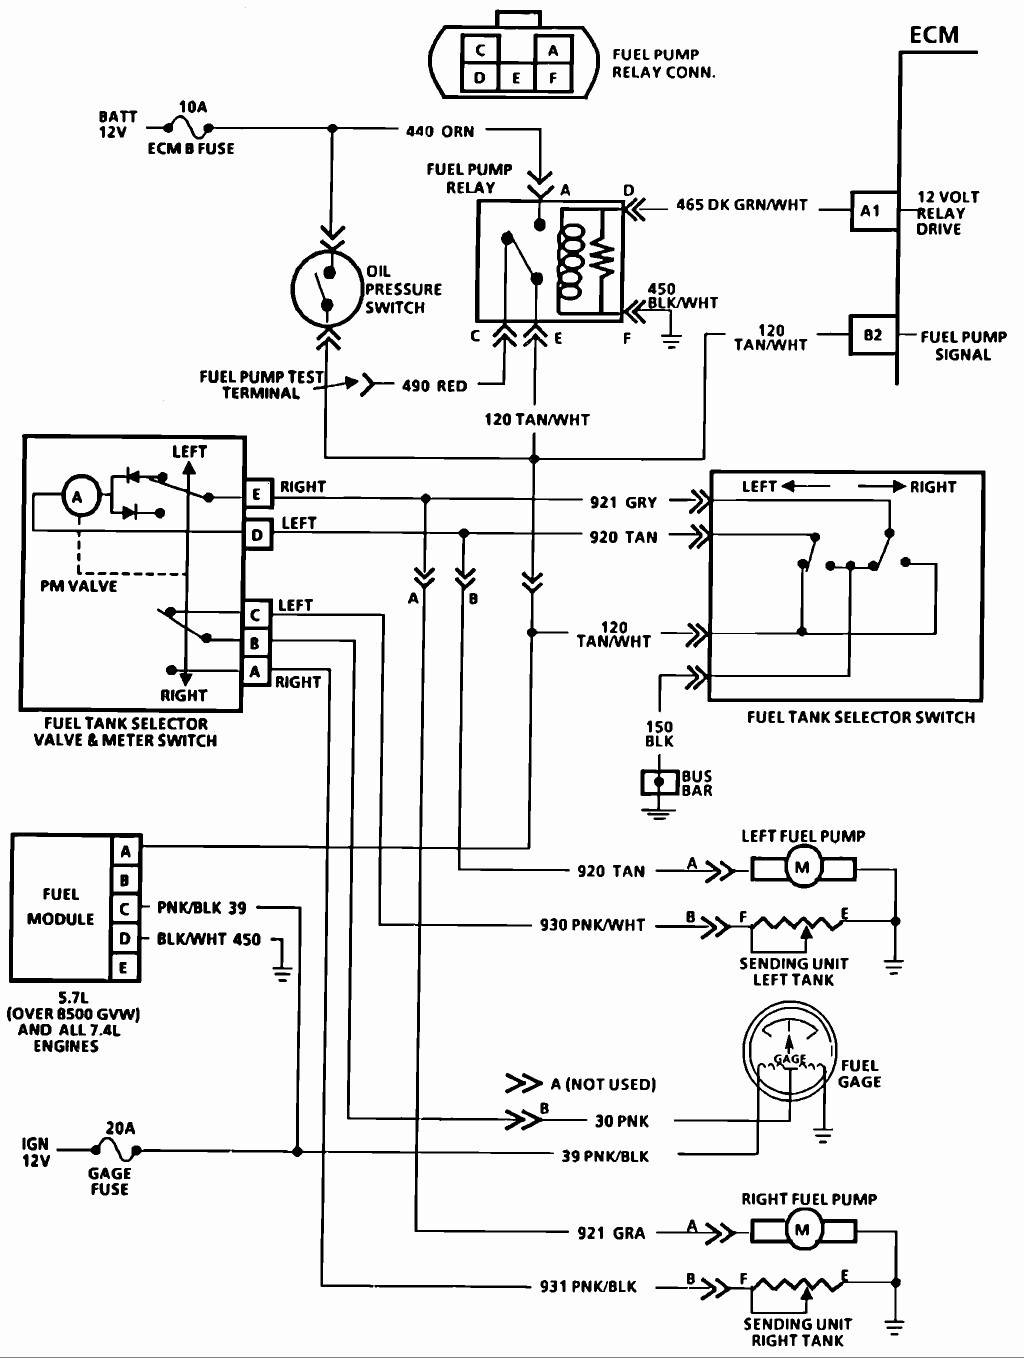 Labeled diagram fuel selector switch tank wiring